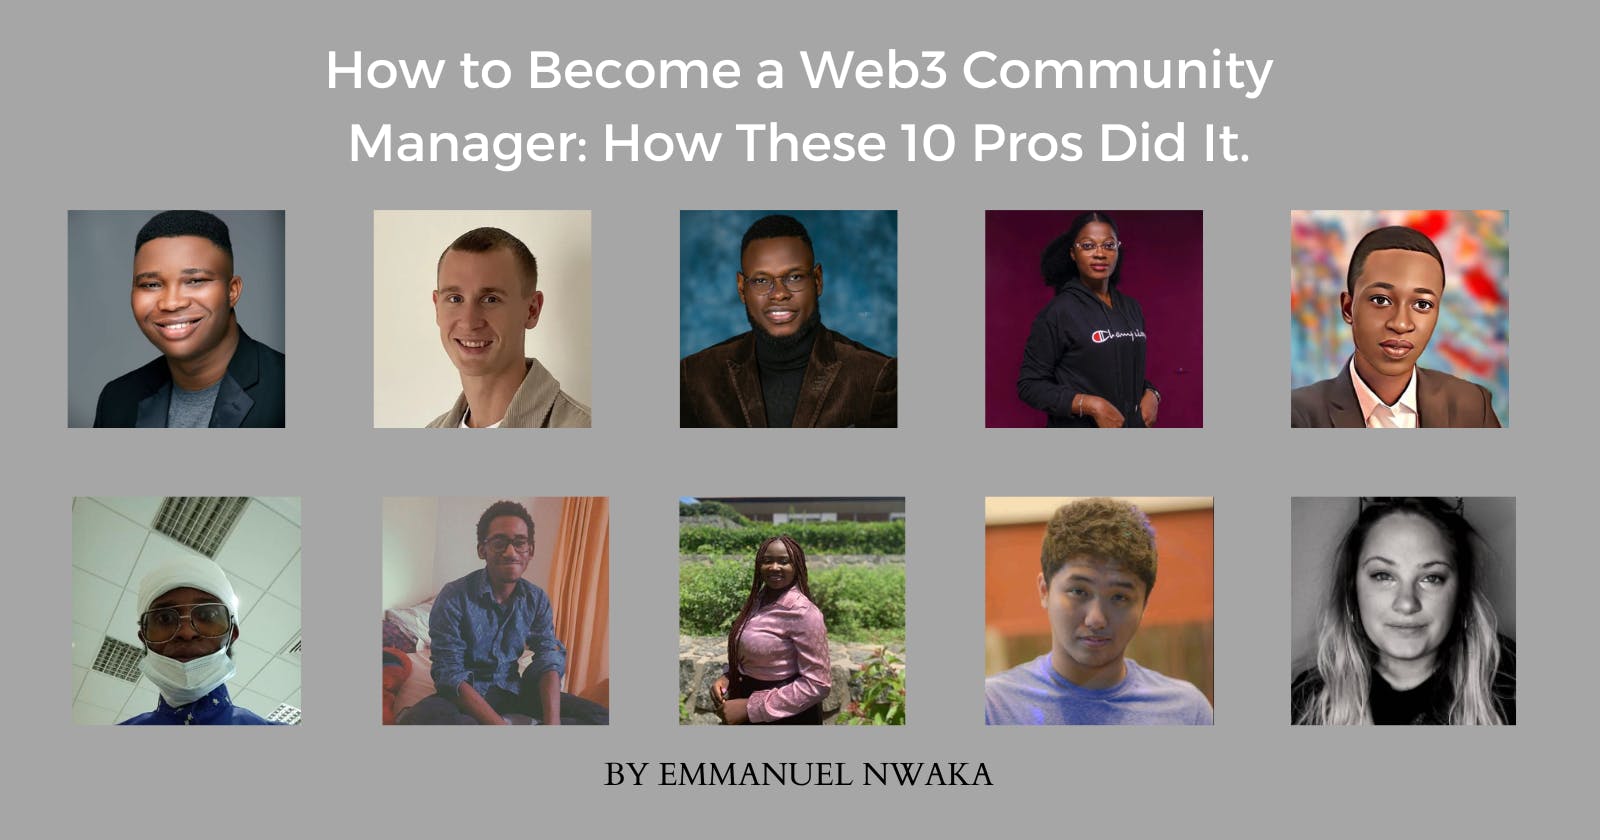 How To Become a Web3 Community Manager: How These 10 Pros Did It.